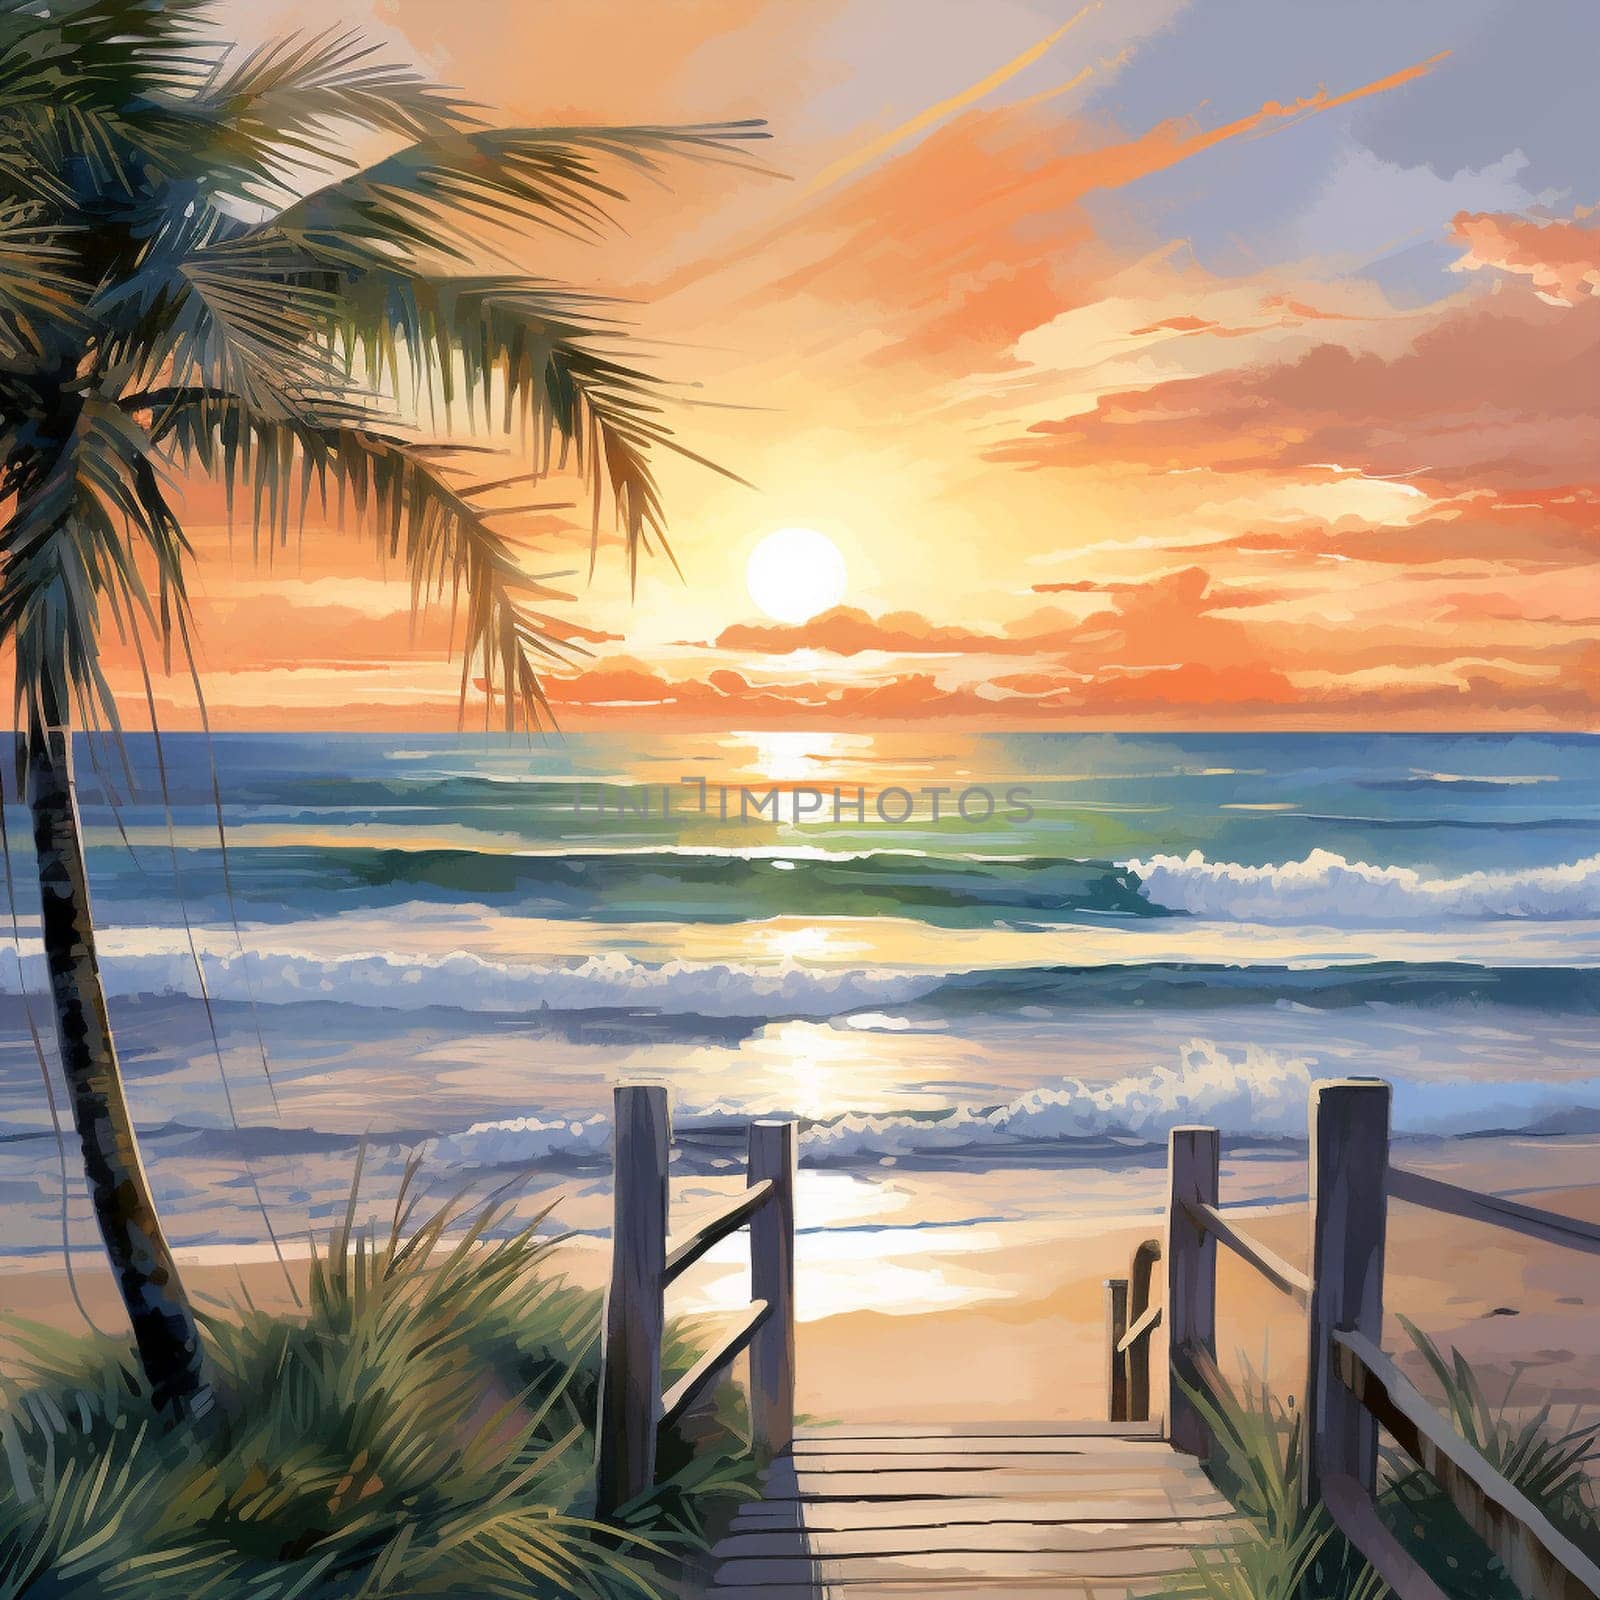 Immerse yourself in the serene beauty of nature with this traditional watercolor painting. 'Azure Reflections' captures the essence of a coastal scene at sunset, where the ocean mirrors the breathtaking colors of the sky. The calm waves rhythmically lap against the shore, creating a soothing atmosphere. A picturesque beach with soft, golden sands is surrounded by lush green foliage and tall palm trees, inviting you to unwind and relax. In the distance, a small wooden dock extends into the water, emphasizing the tranquil environment. The sky is adorned with warm hues of orange, pink, and purple as the sun gracefully sets below the horizon, casting a shimmering reflection on the water's surface. A few seagulls soar above, completing the peaceful ambiance of this scene.